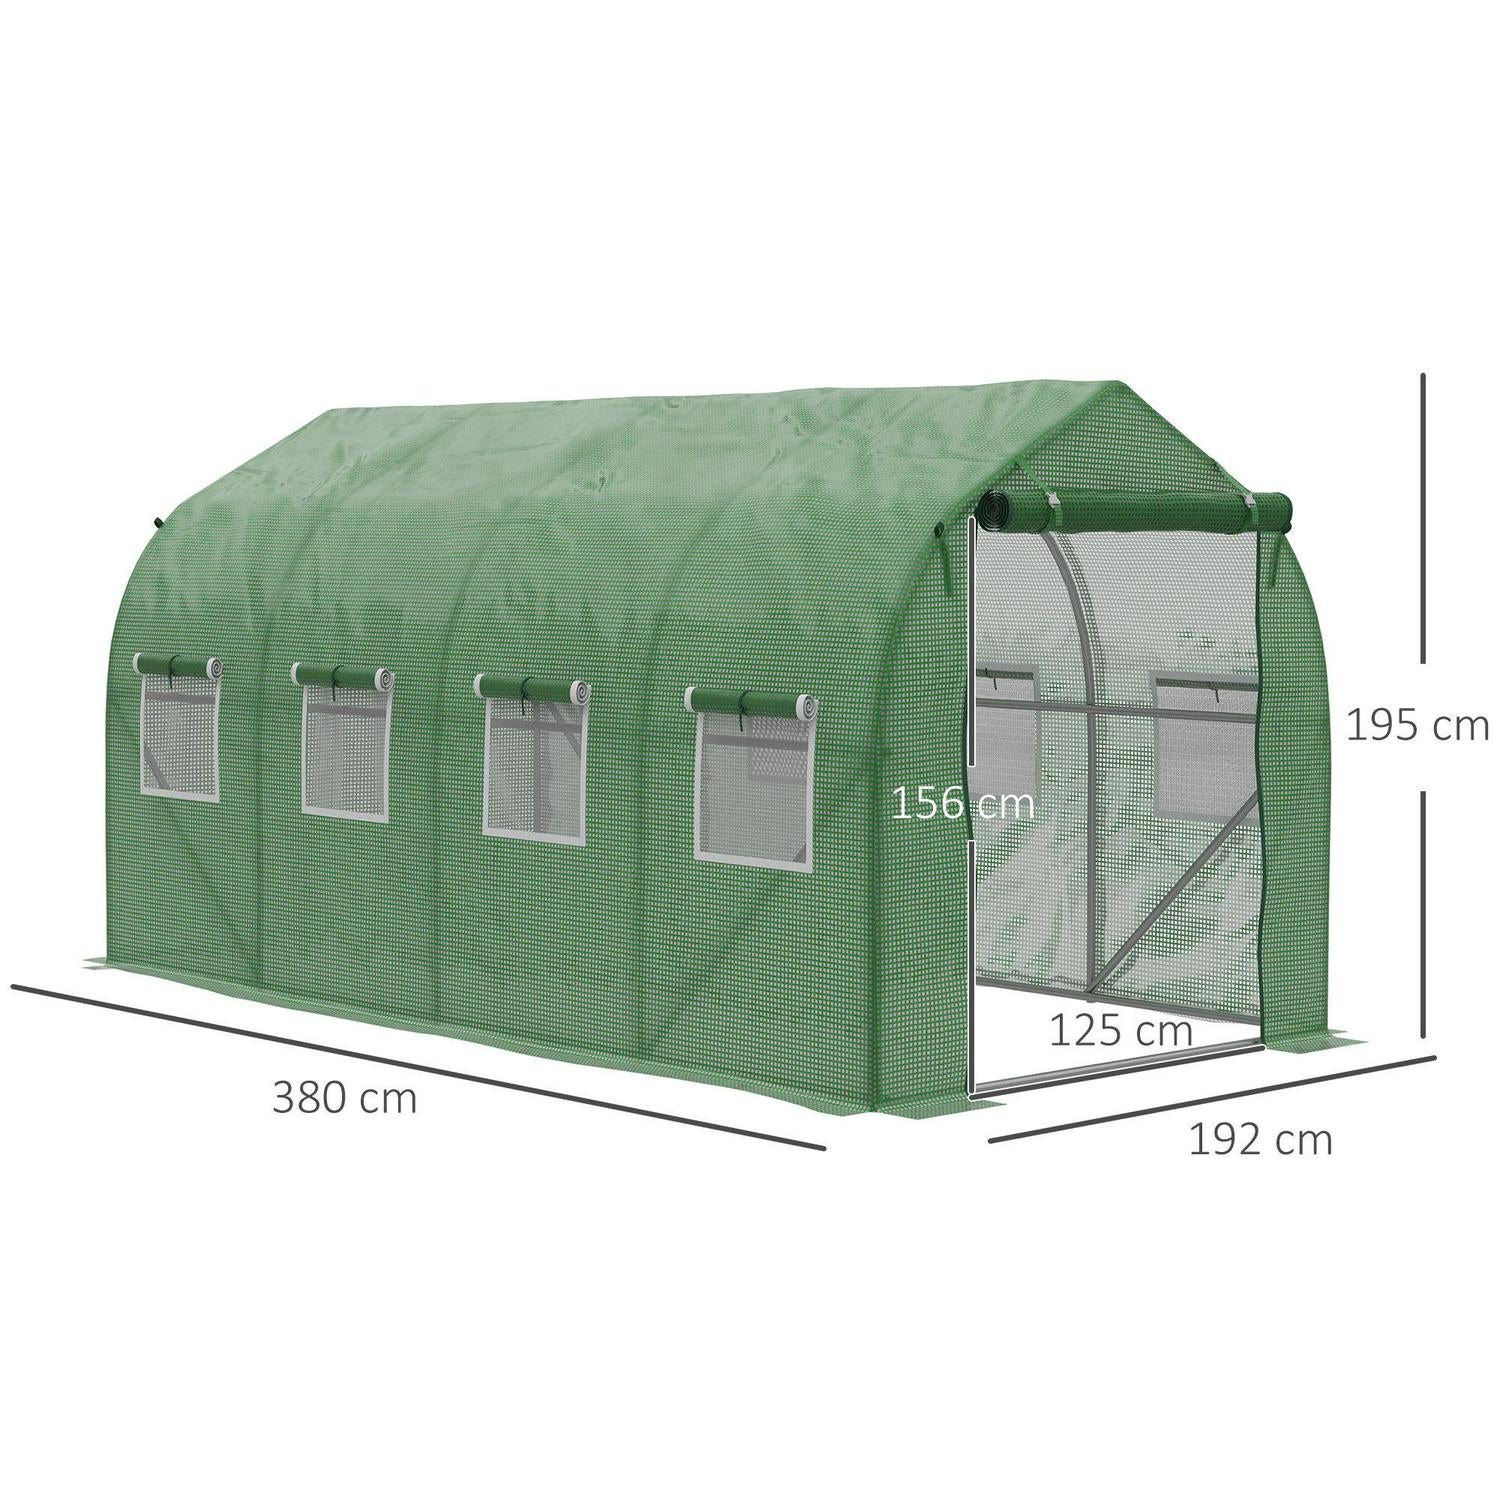 Walk-in Polytunnel Round / Gable Top Garden Greenhouse Heat Shed (4 X 2 X 2) M